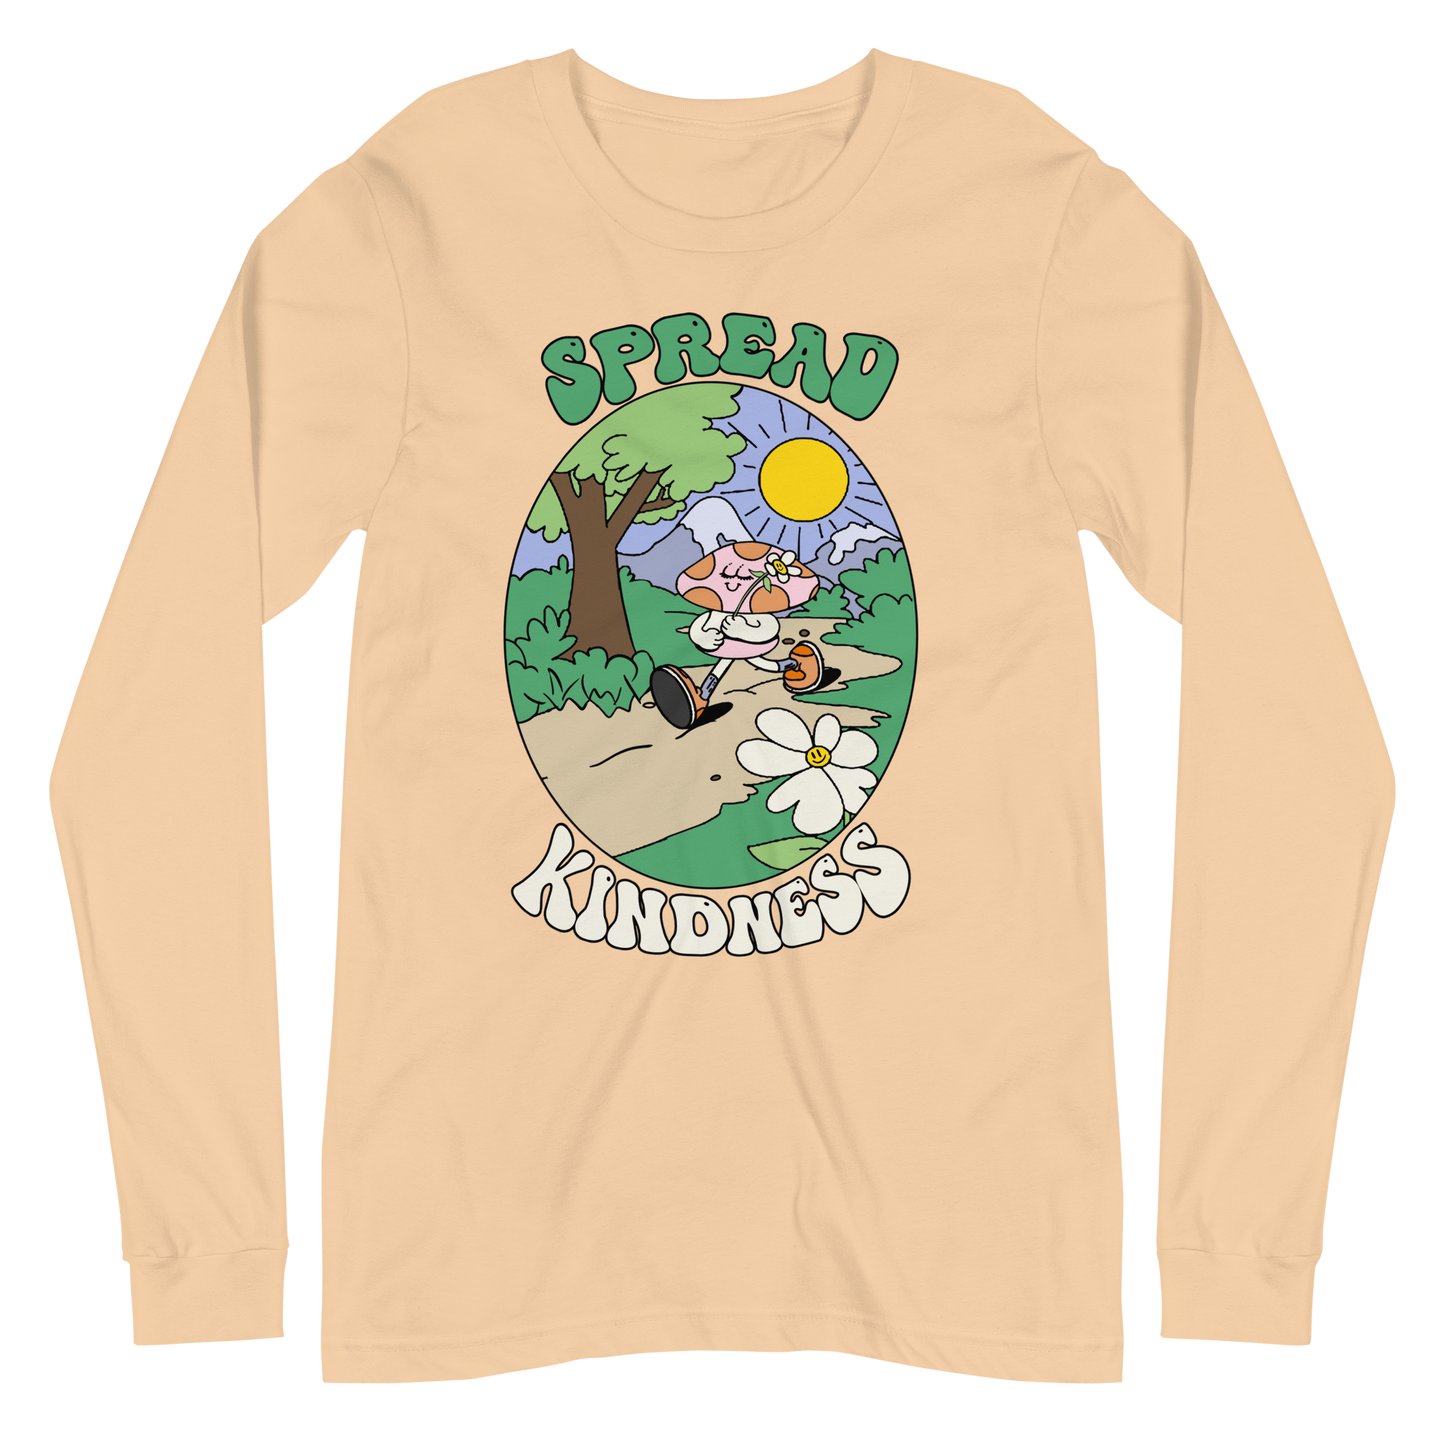 Spread Kindness Graphic Long Sleeve Tee